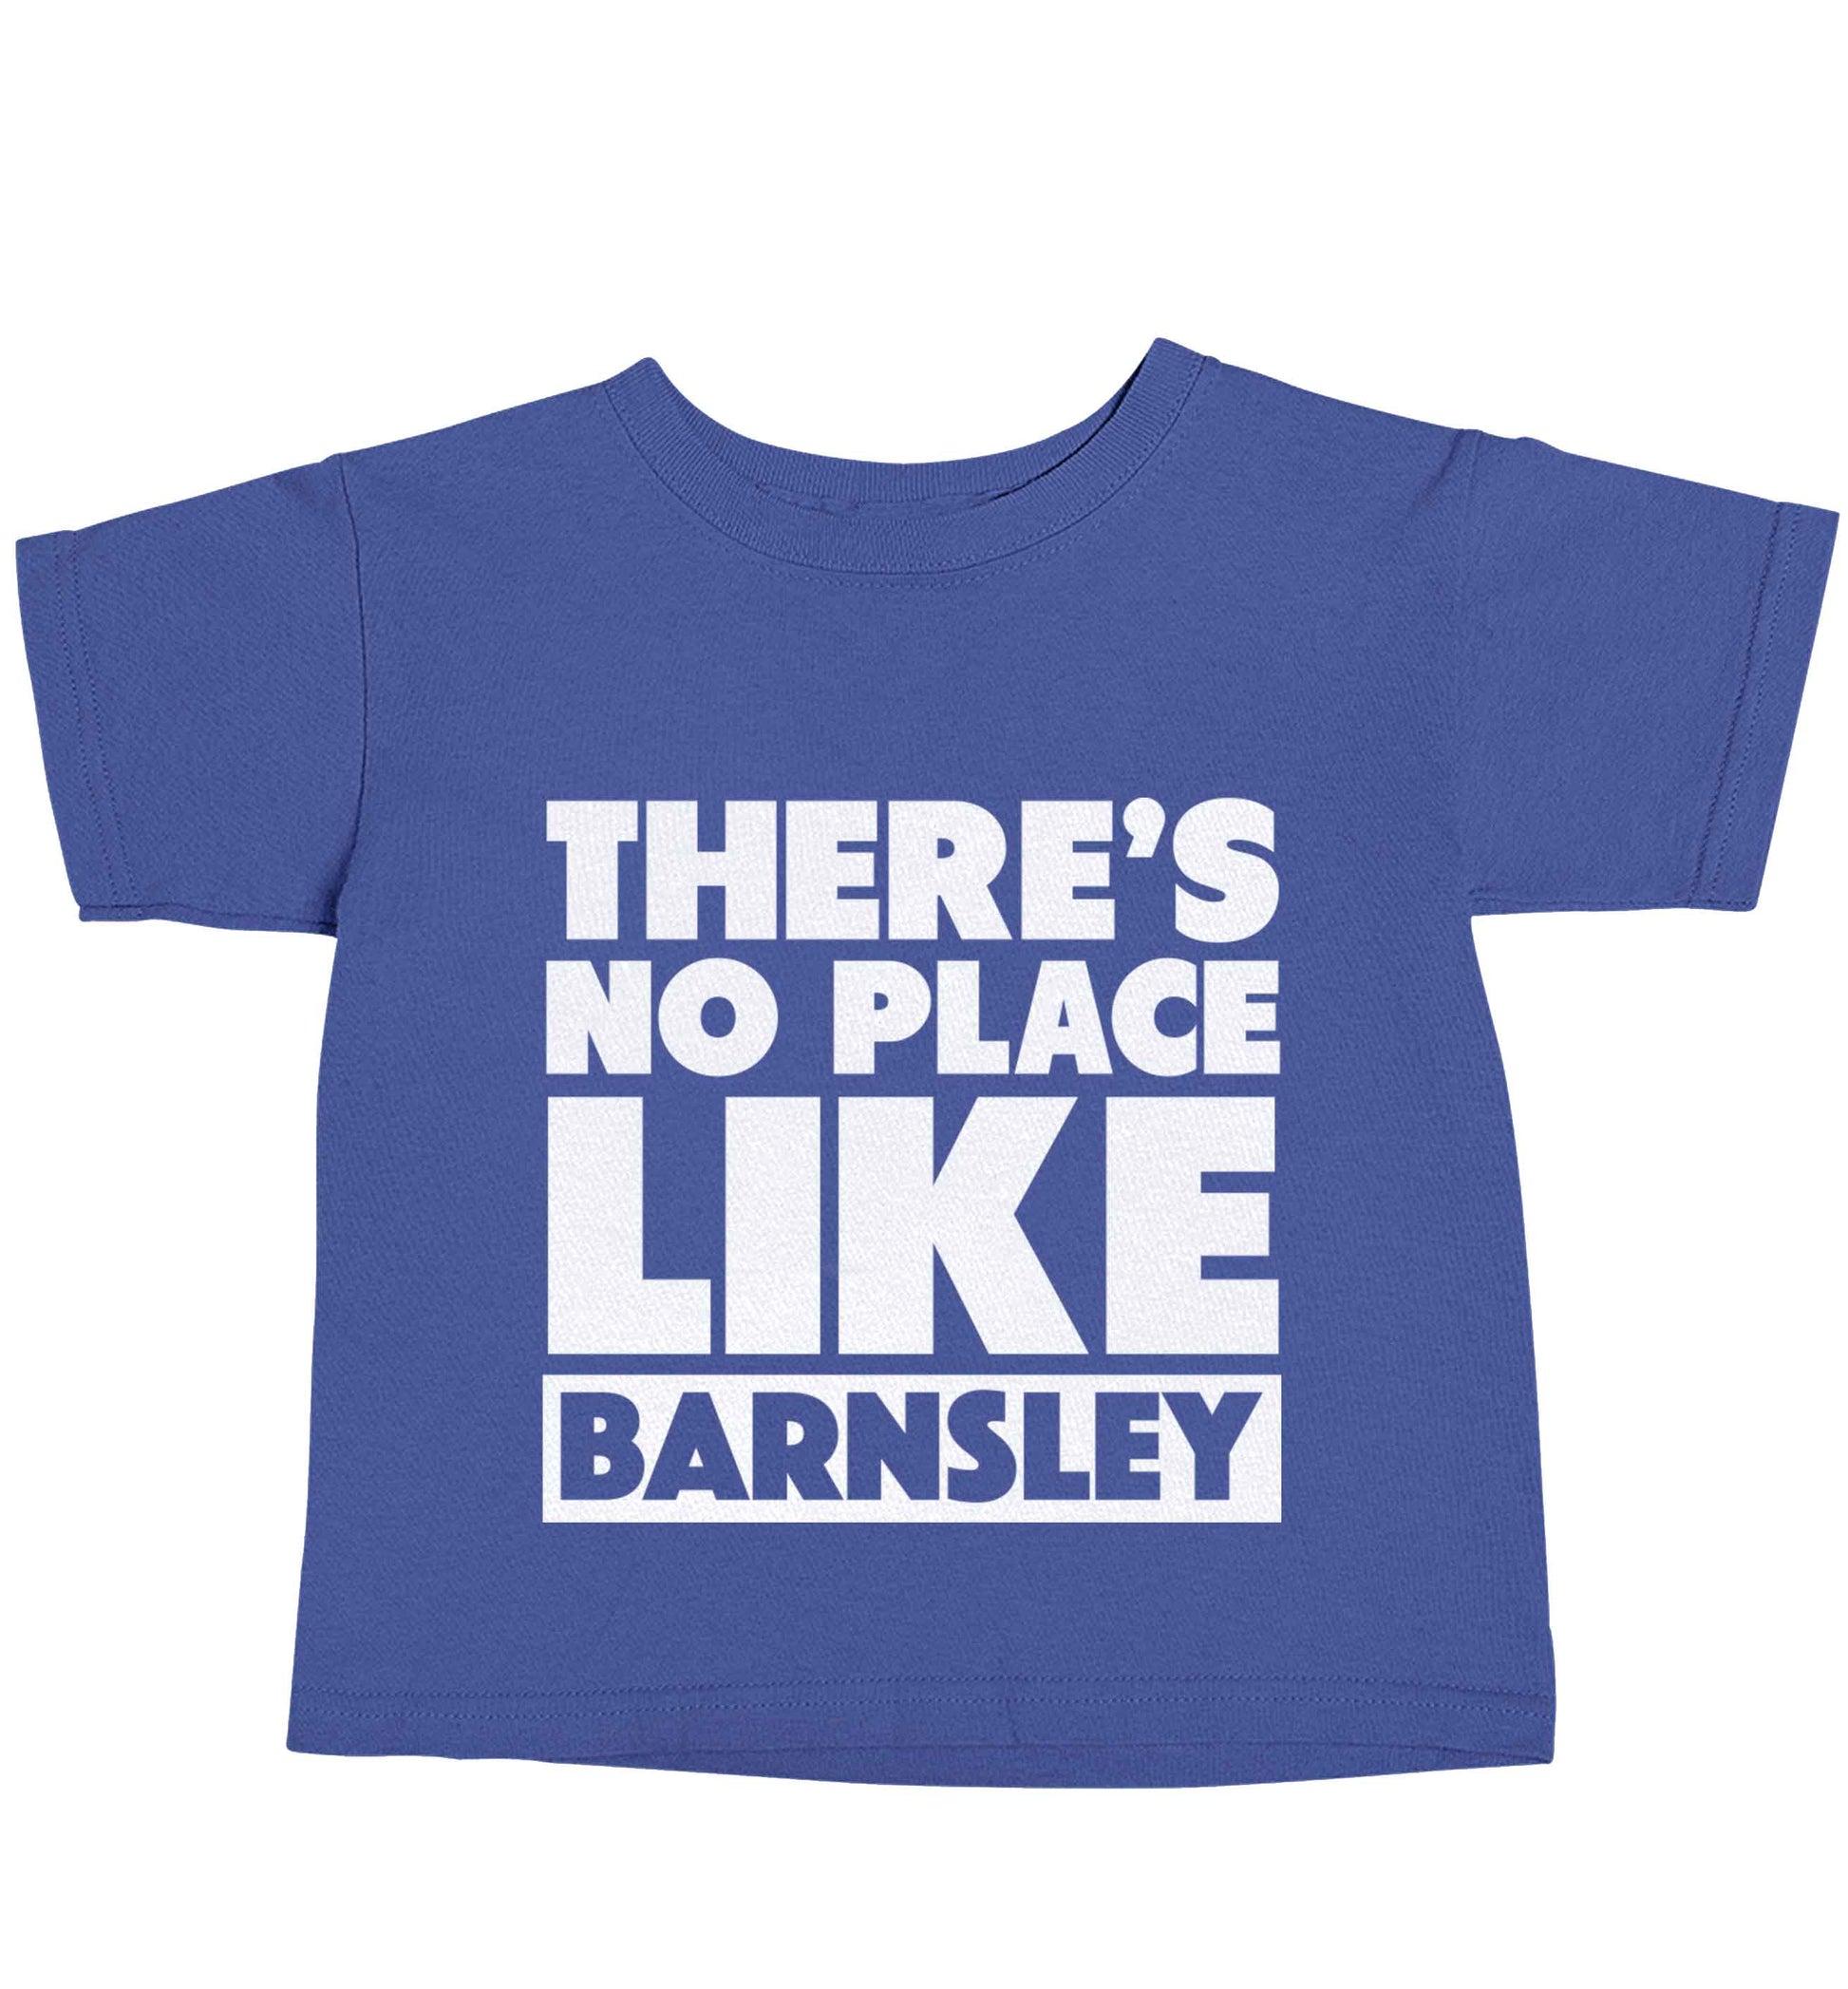 There's No Place Like Barnsley blue baby toddler Tshirt 2 Years